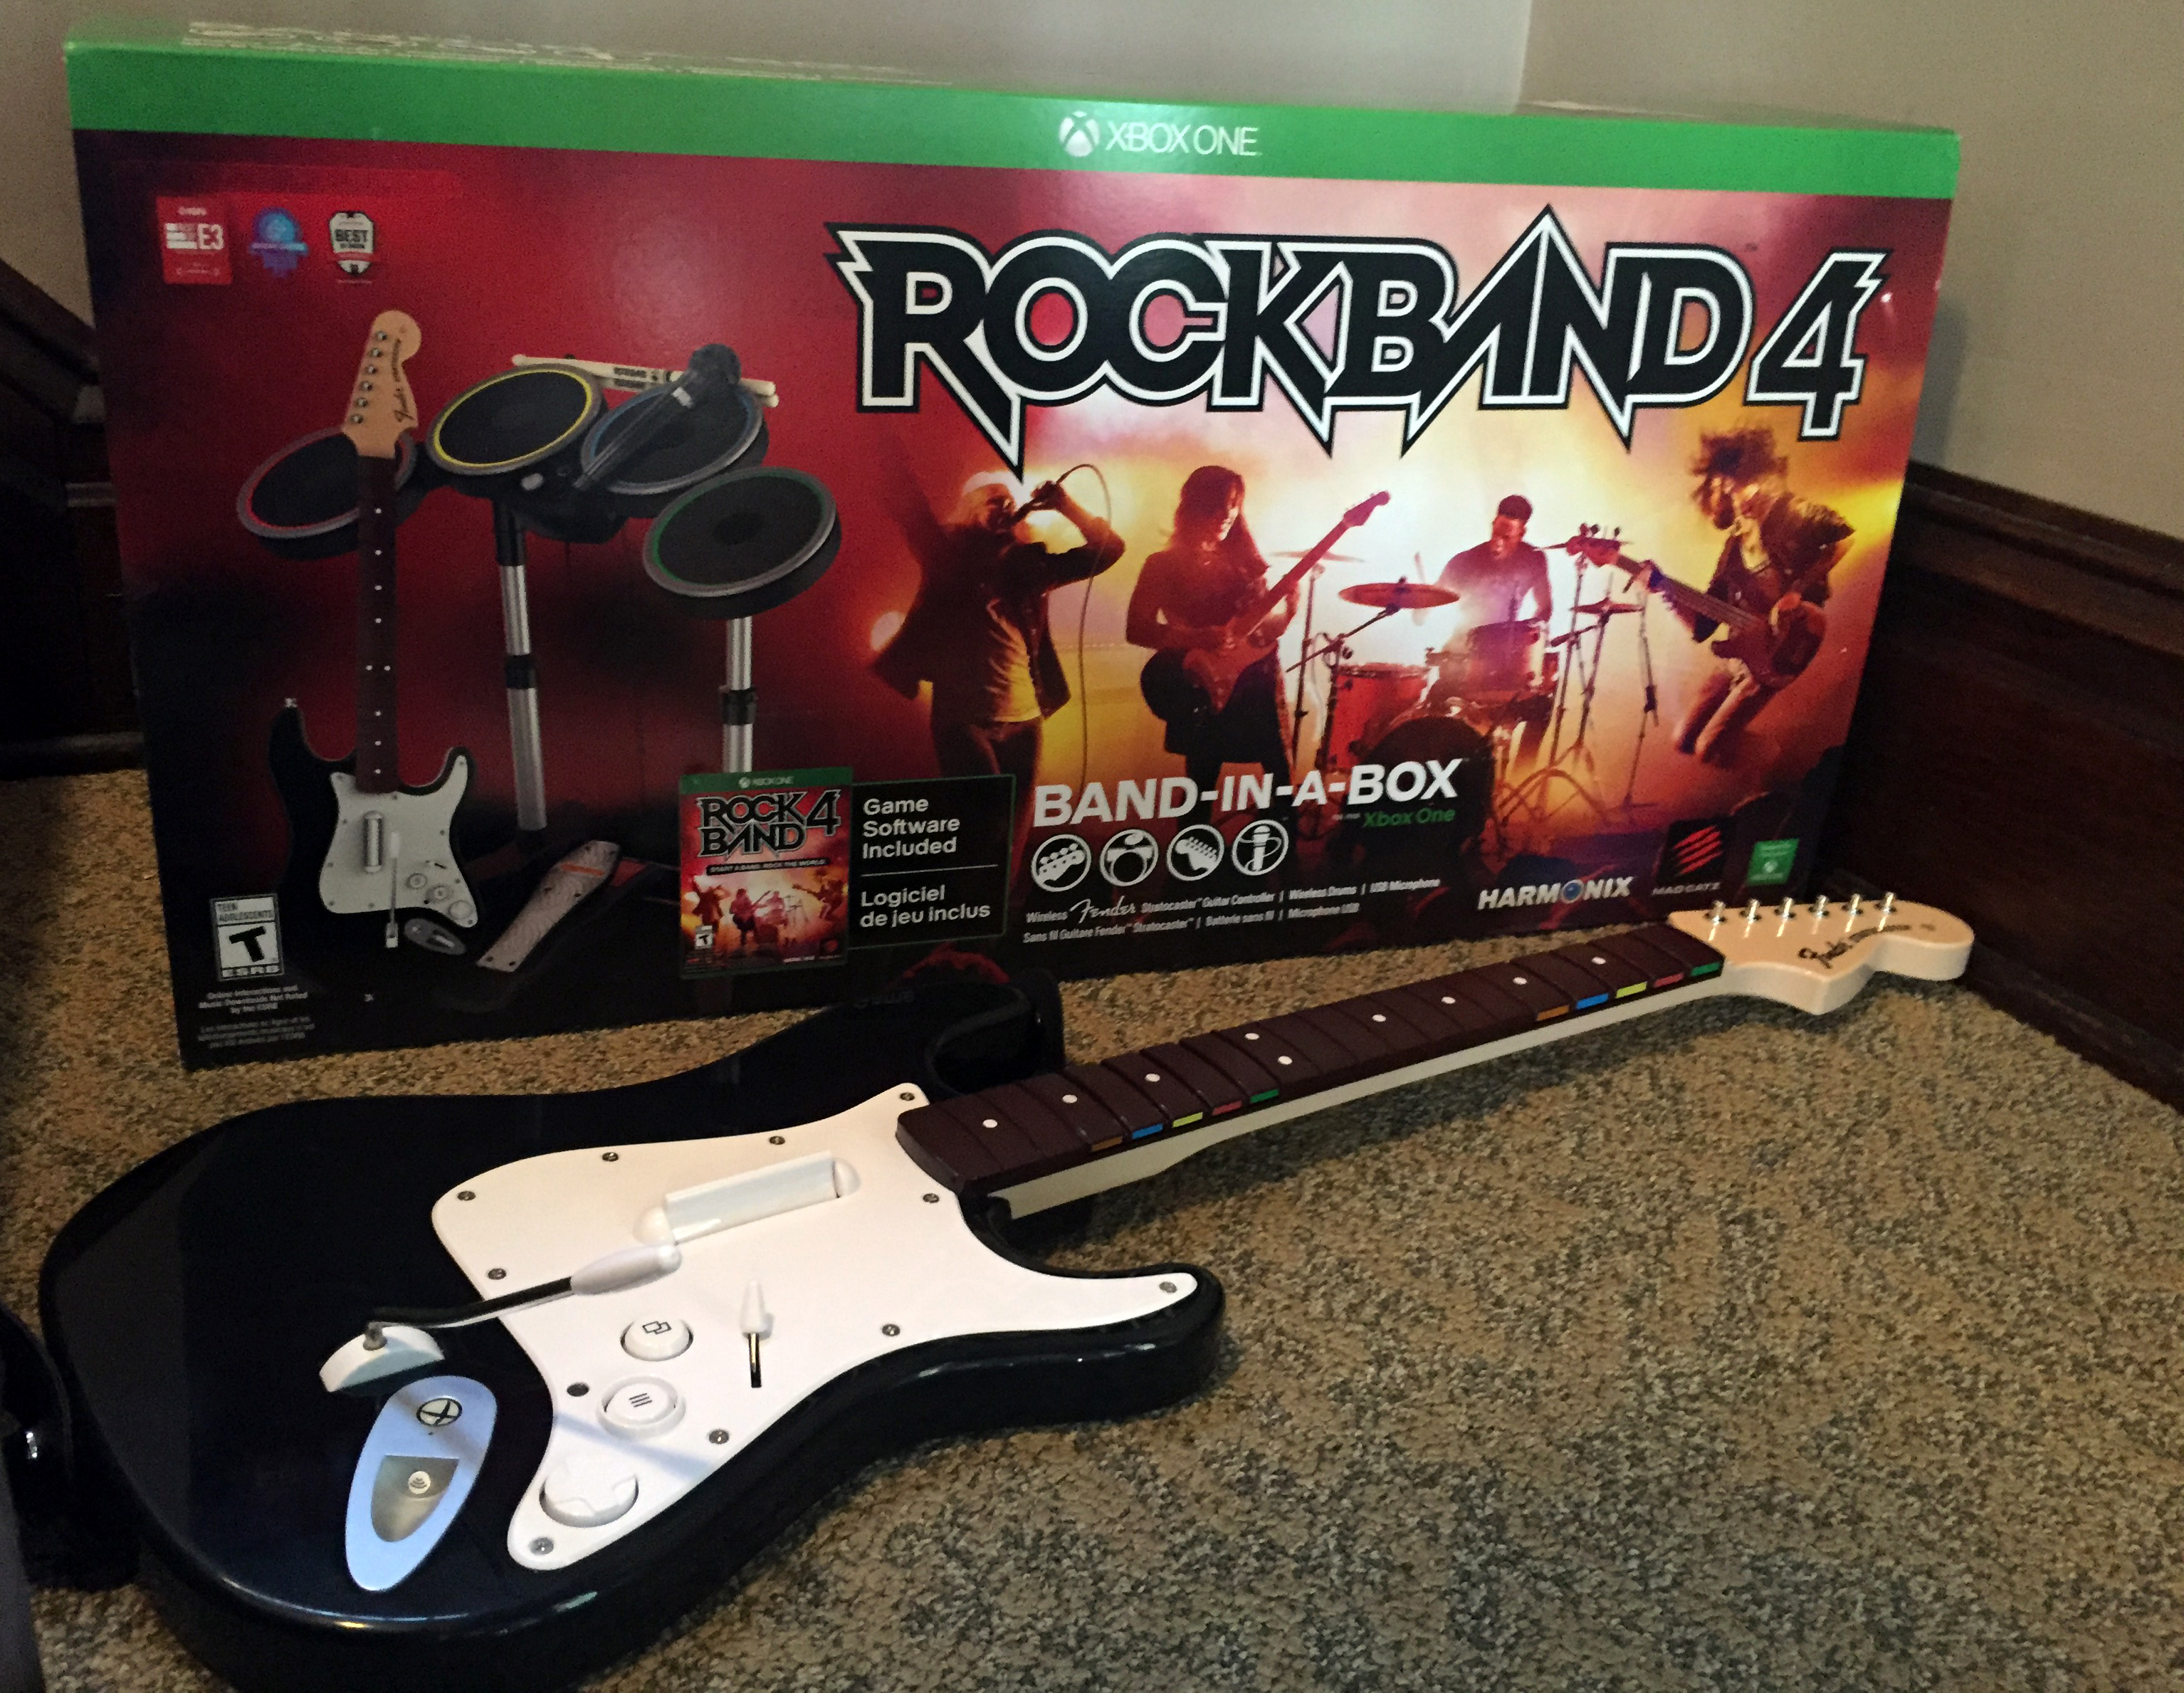 Rock Band 4 makes an old come alive with refreshed gameplay, new songs & updated hardware